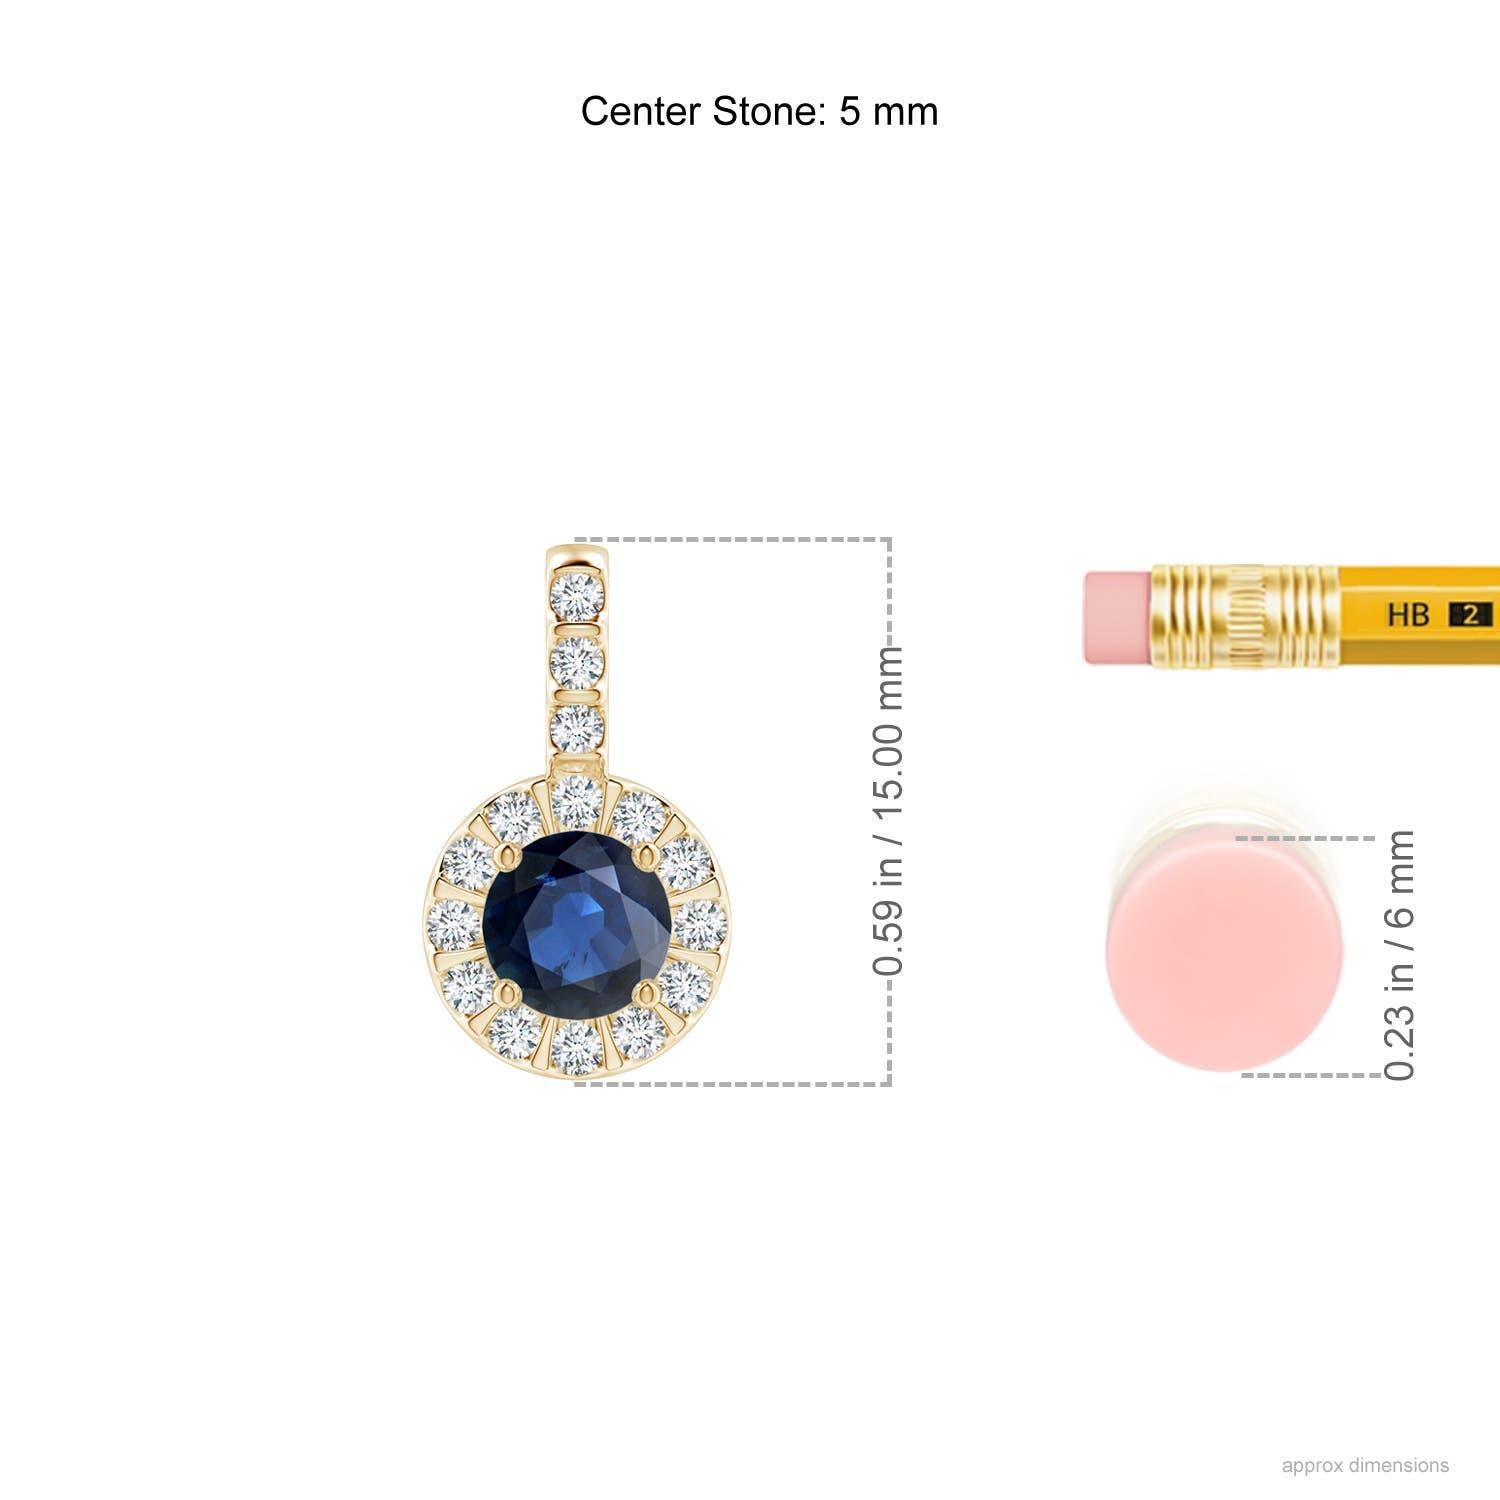 The prong set sapphire's dreamy blue color is enhanced by sparkling diamonds that surround it and adorn the bale. For a distinctive look, the diamonds are mounted in a bar setting. This elegant and stylish sapphire halo pendant is sculpted in 14k